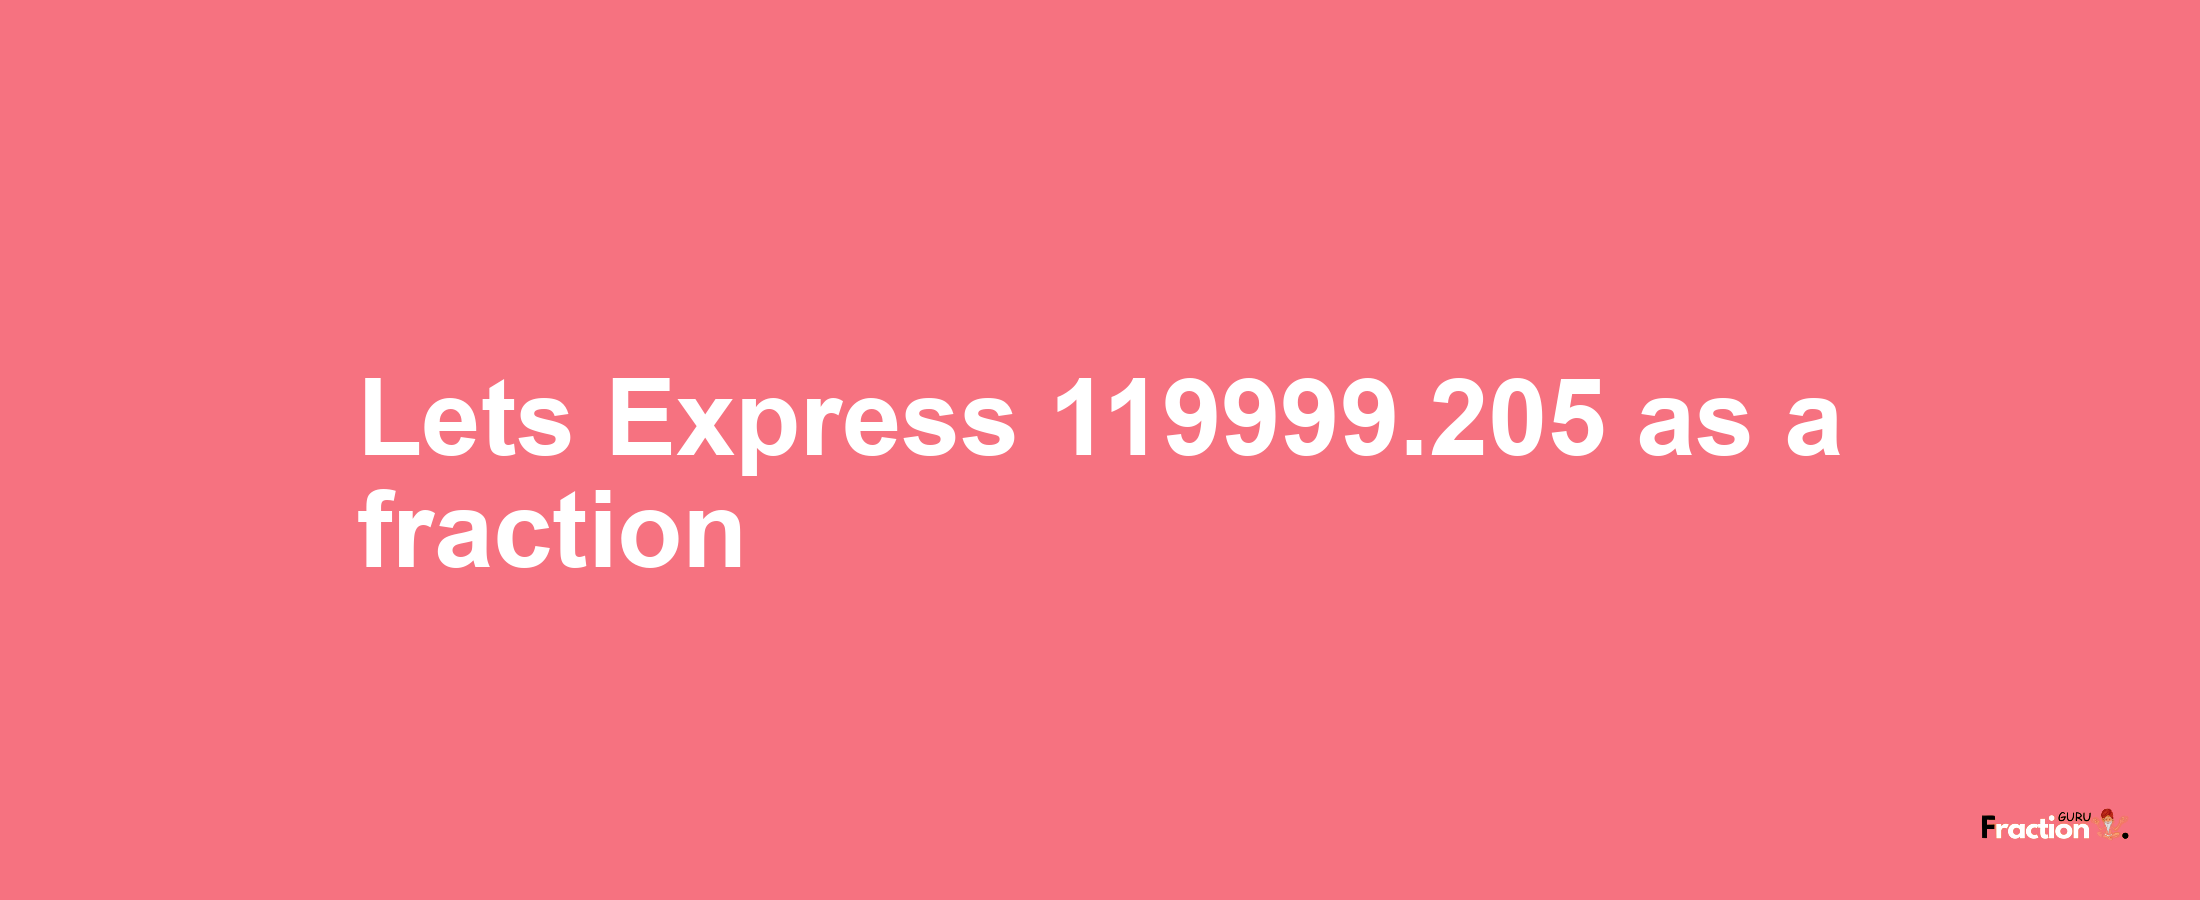 Lets Express 119999.205 as afraction